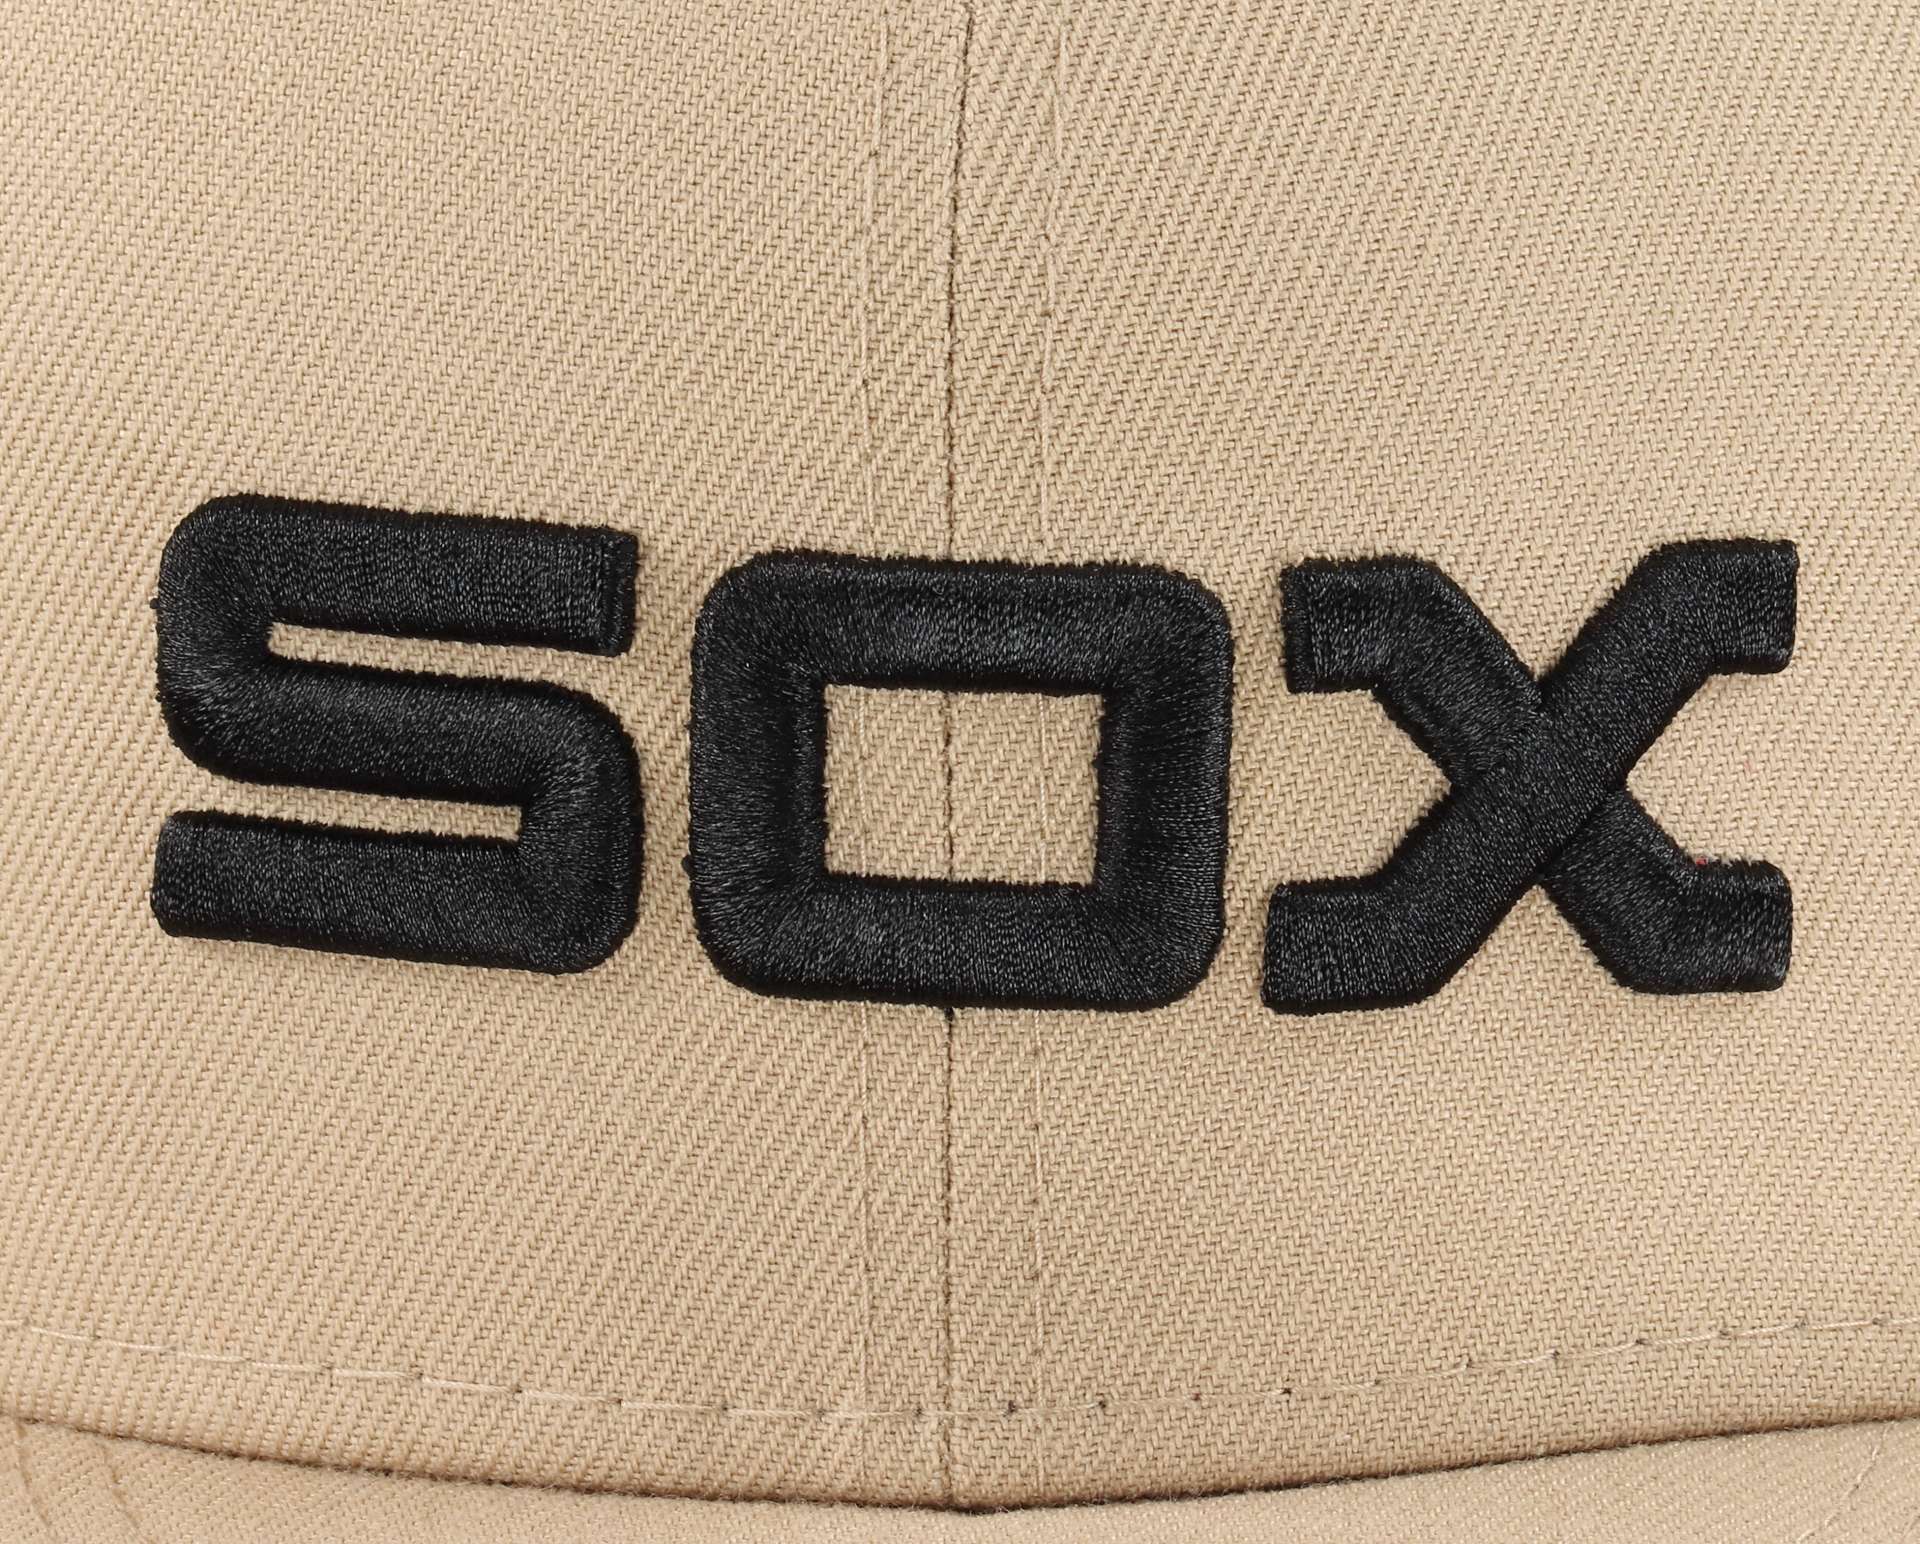 Chicago White Sox MLB Camel Black Undervisor Cooperstown 59Fifty Basecap New Era